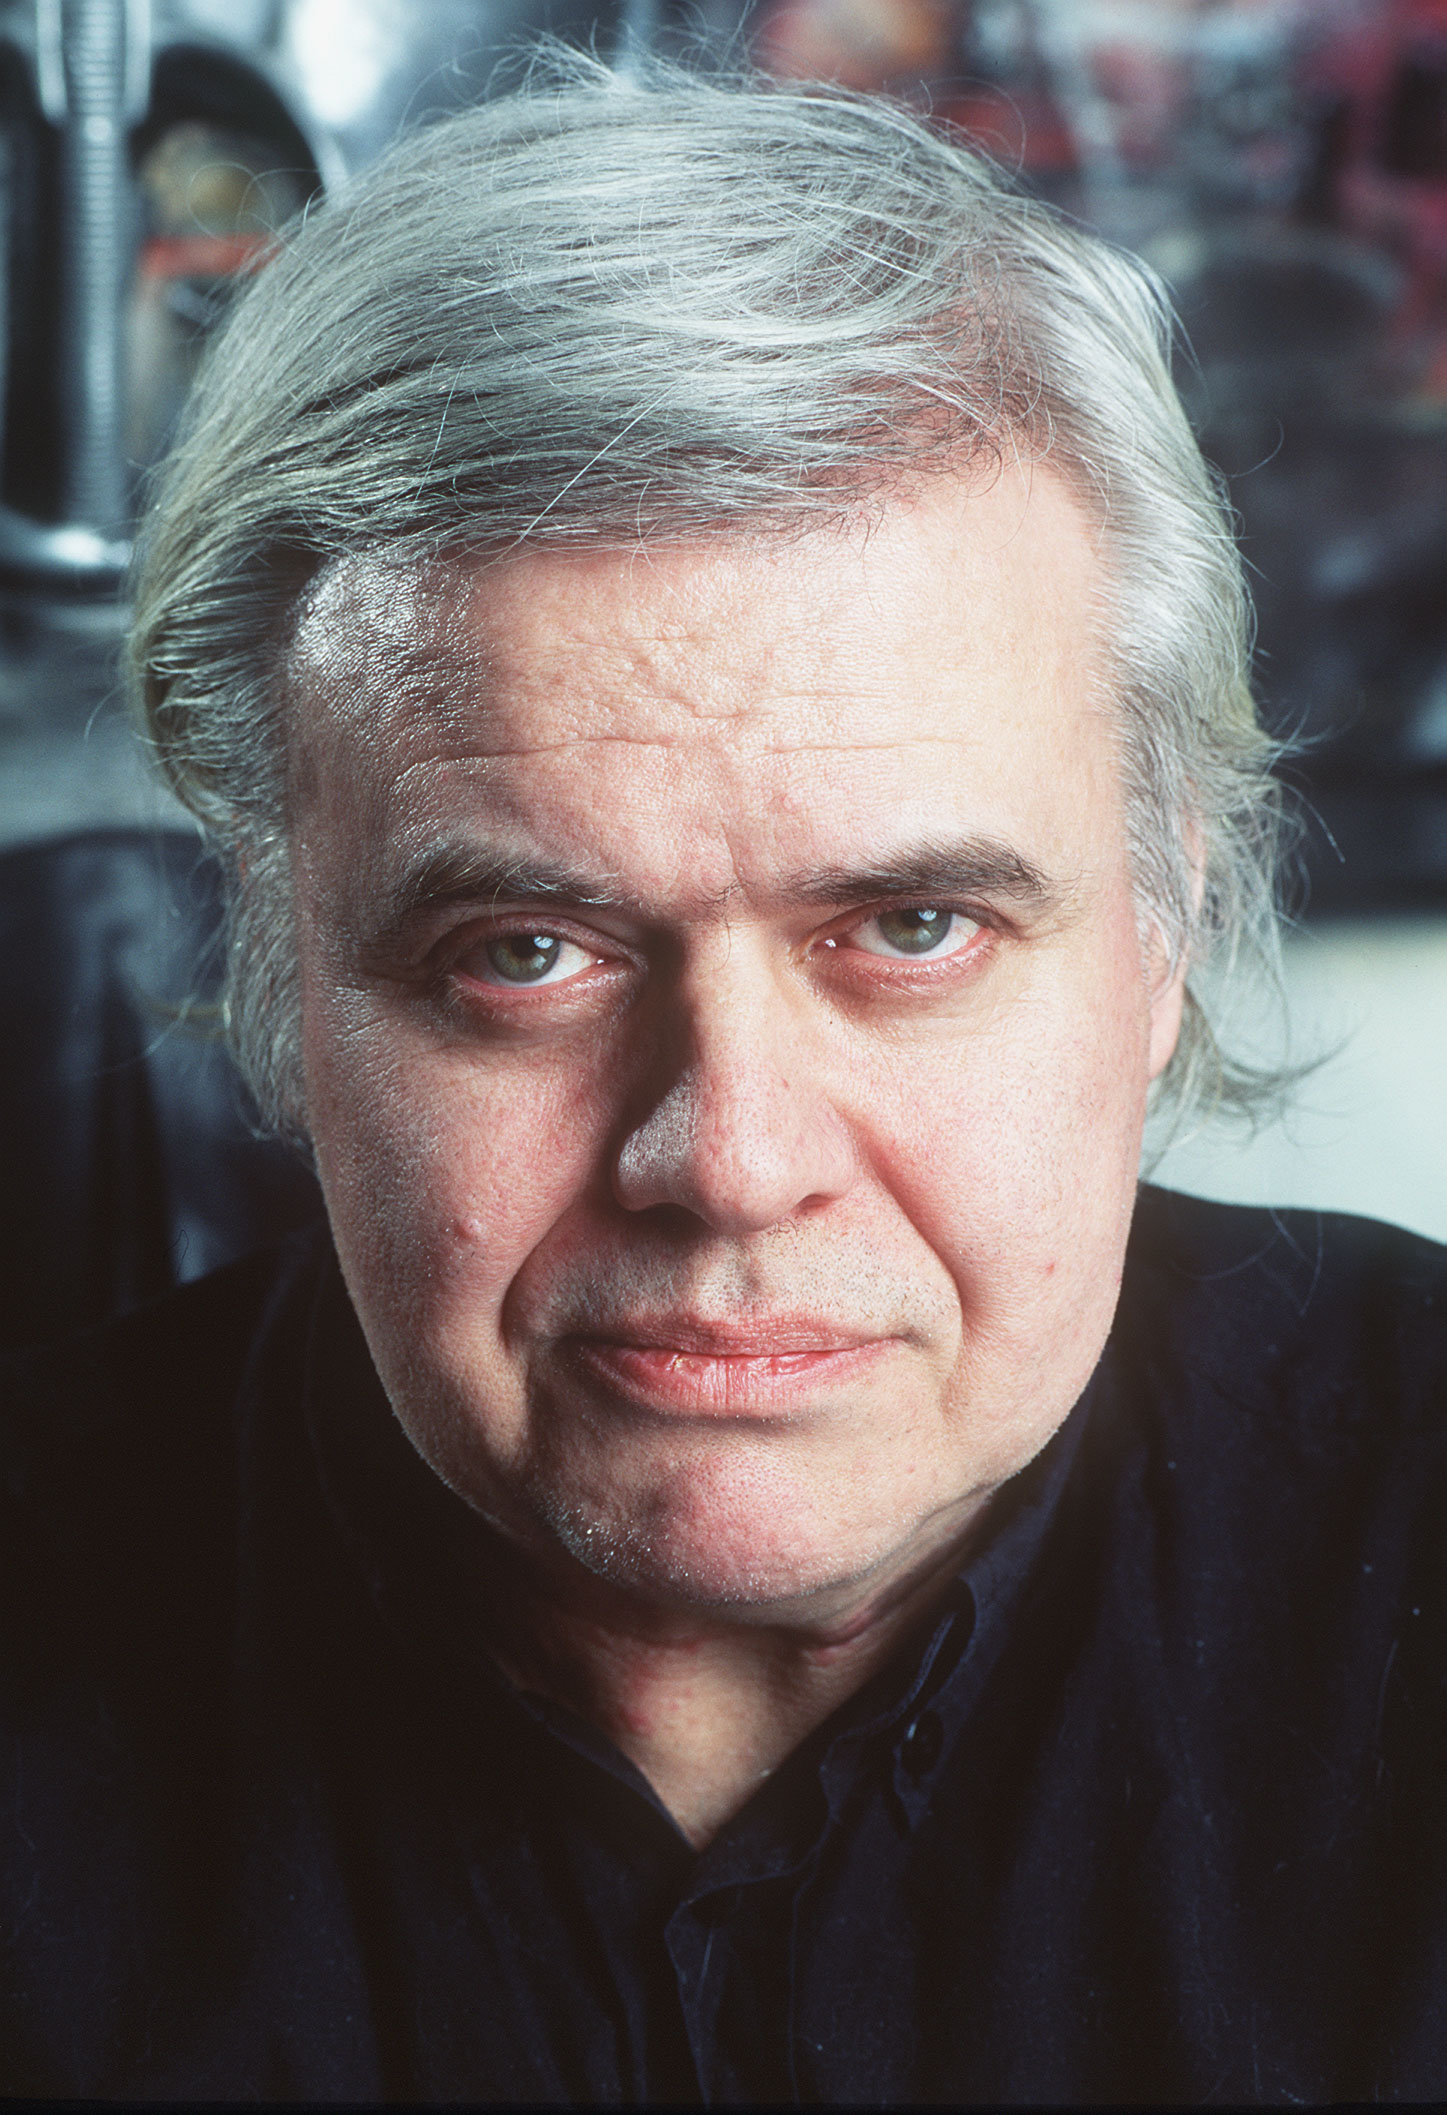 PHOTO: In this 1995 file picture Swiss artist H.R. Giger  is photographed at his house in Zurich, Switzerland.  